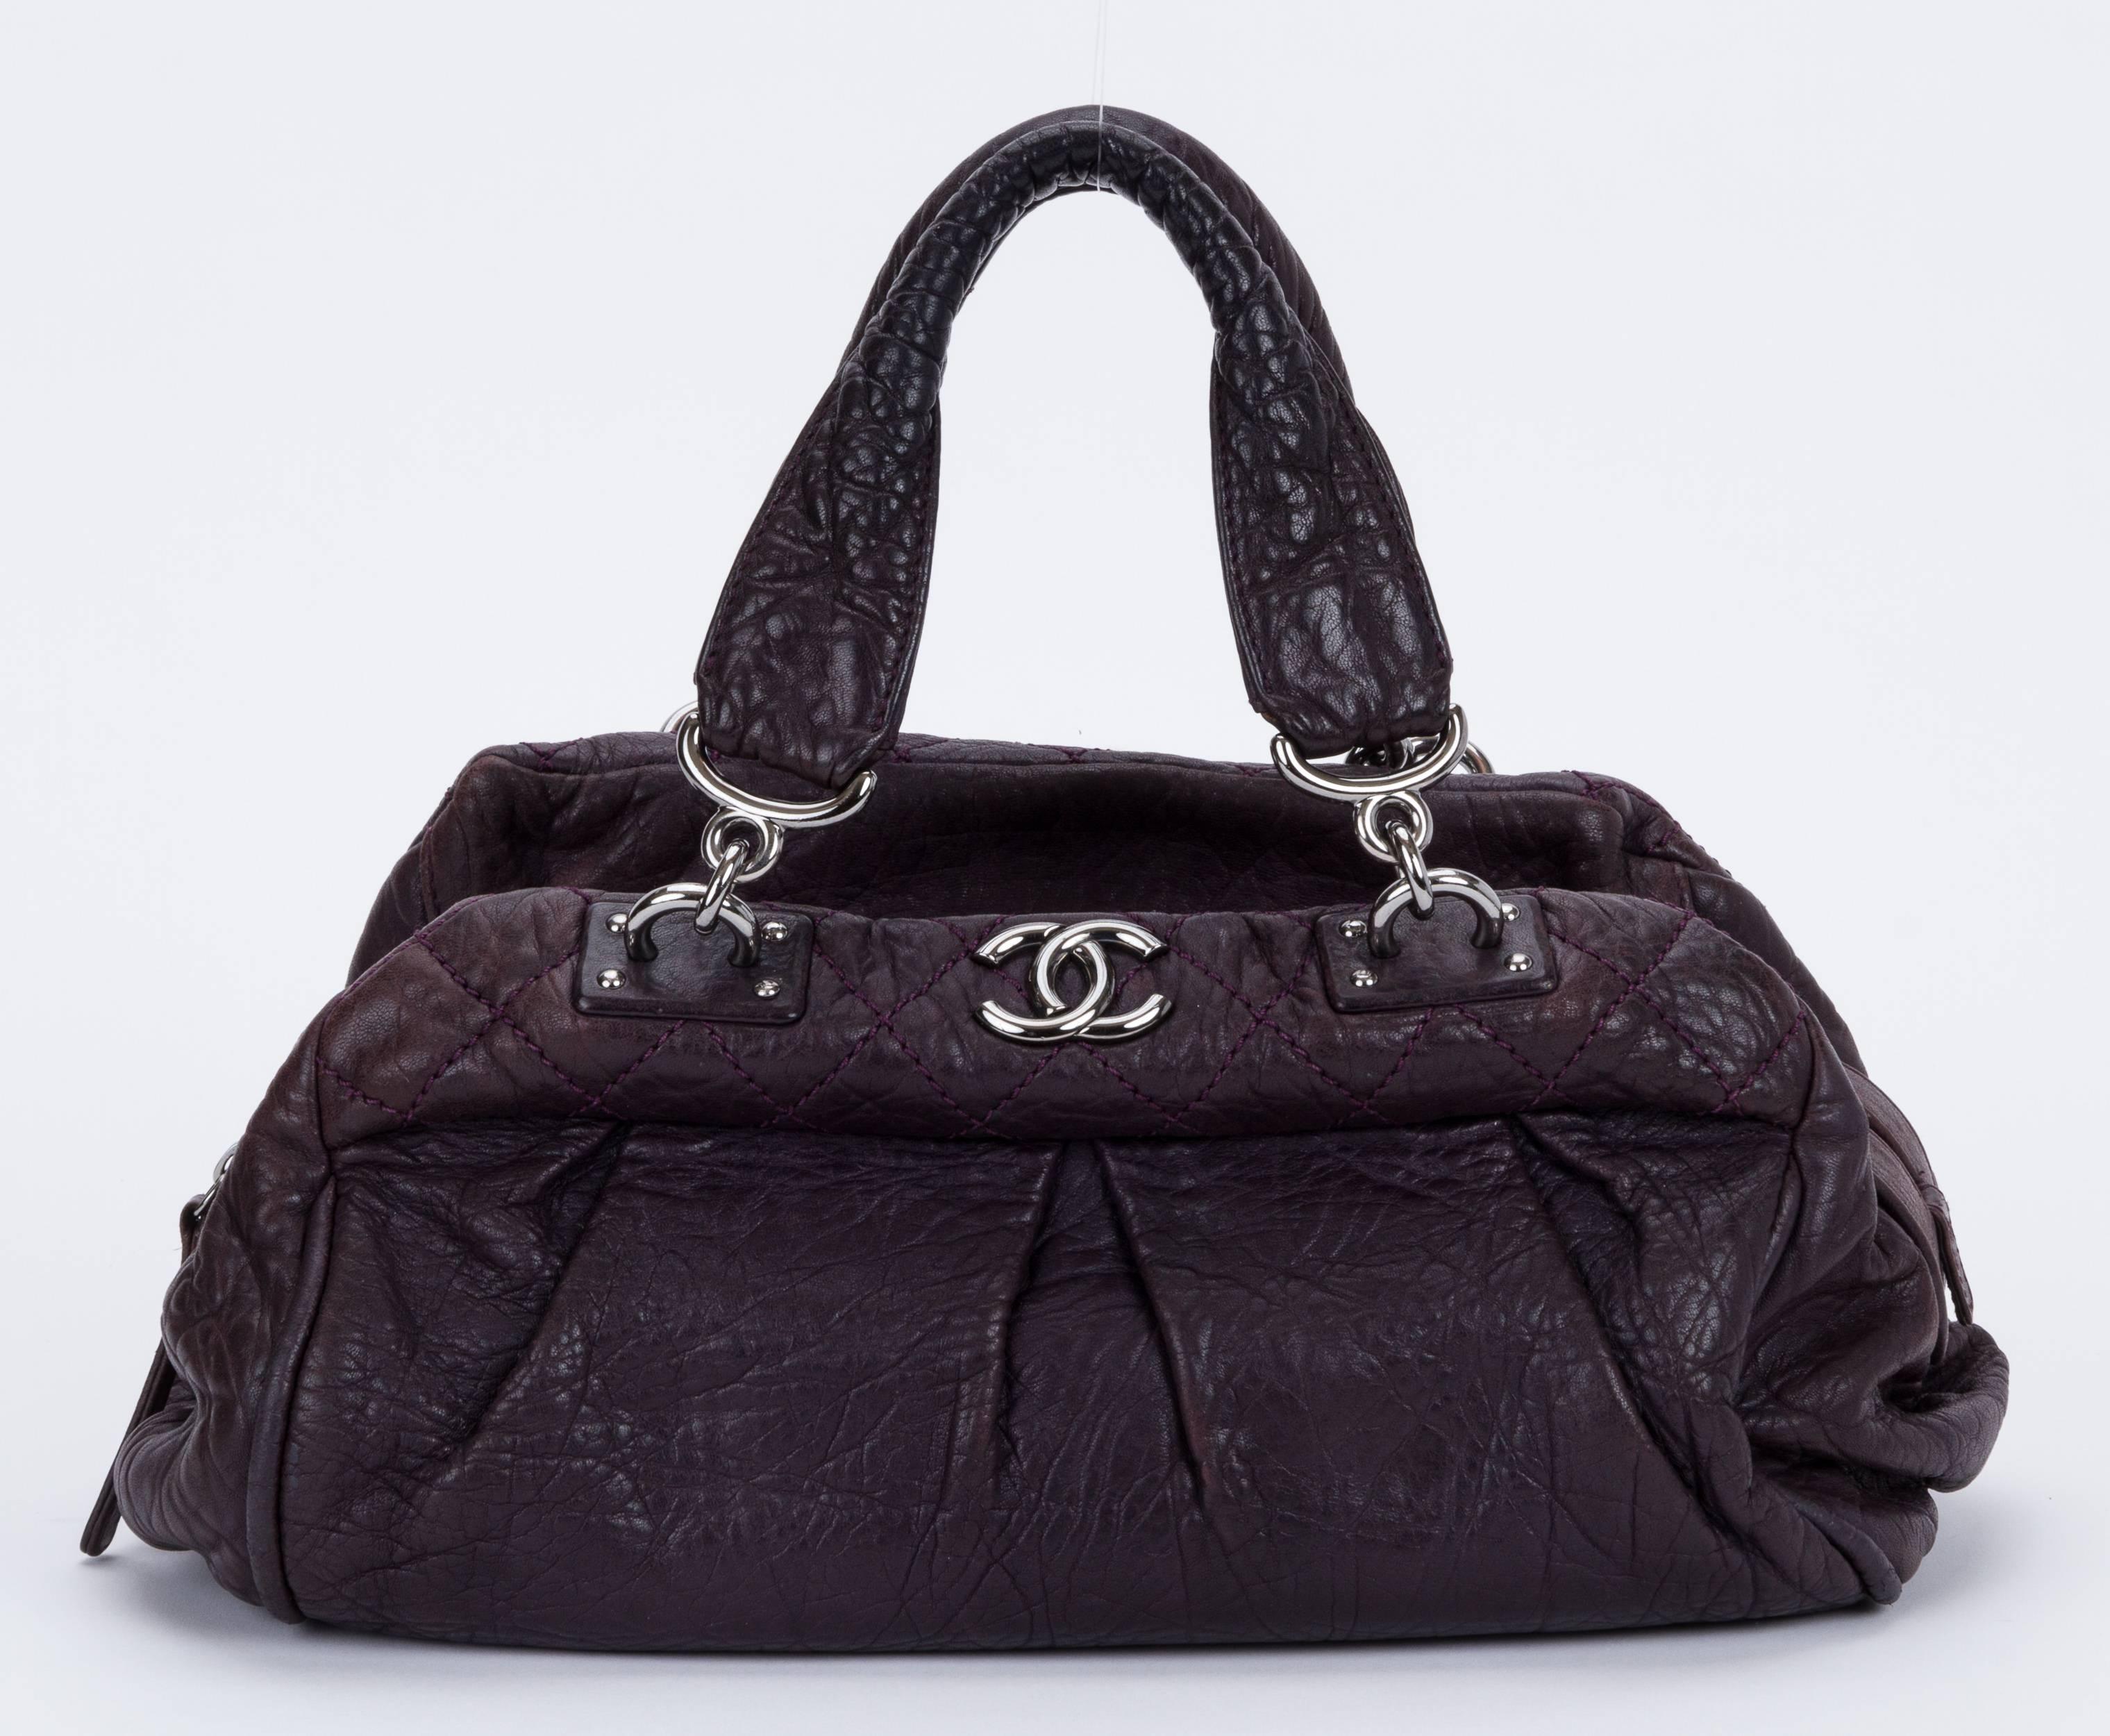 Chanel eggplant distressed leather handbag lined in platinum leather. Handle drop 5.5